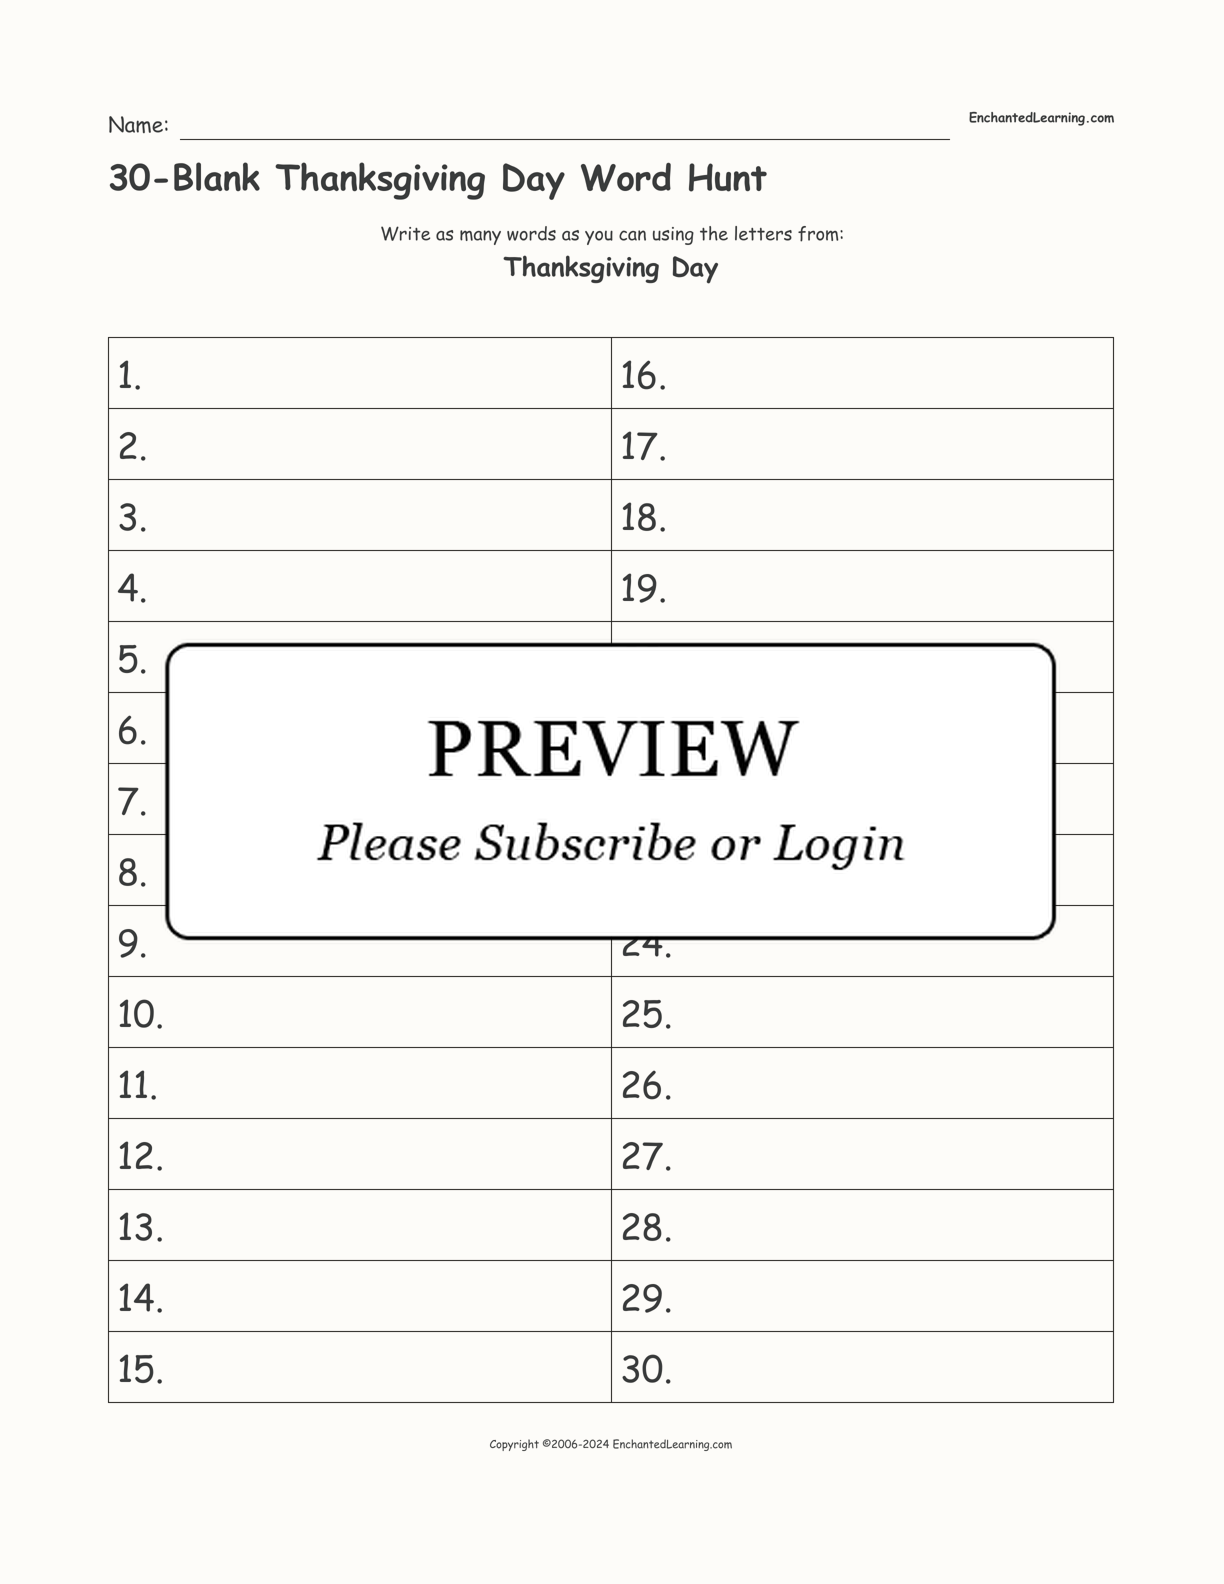 30-Blank Thanksgiving Day Word Hunt interactive worksheet page 1